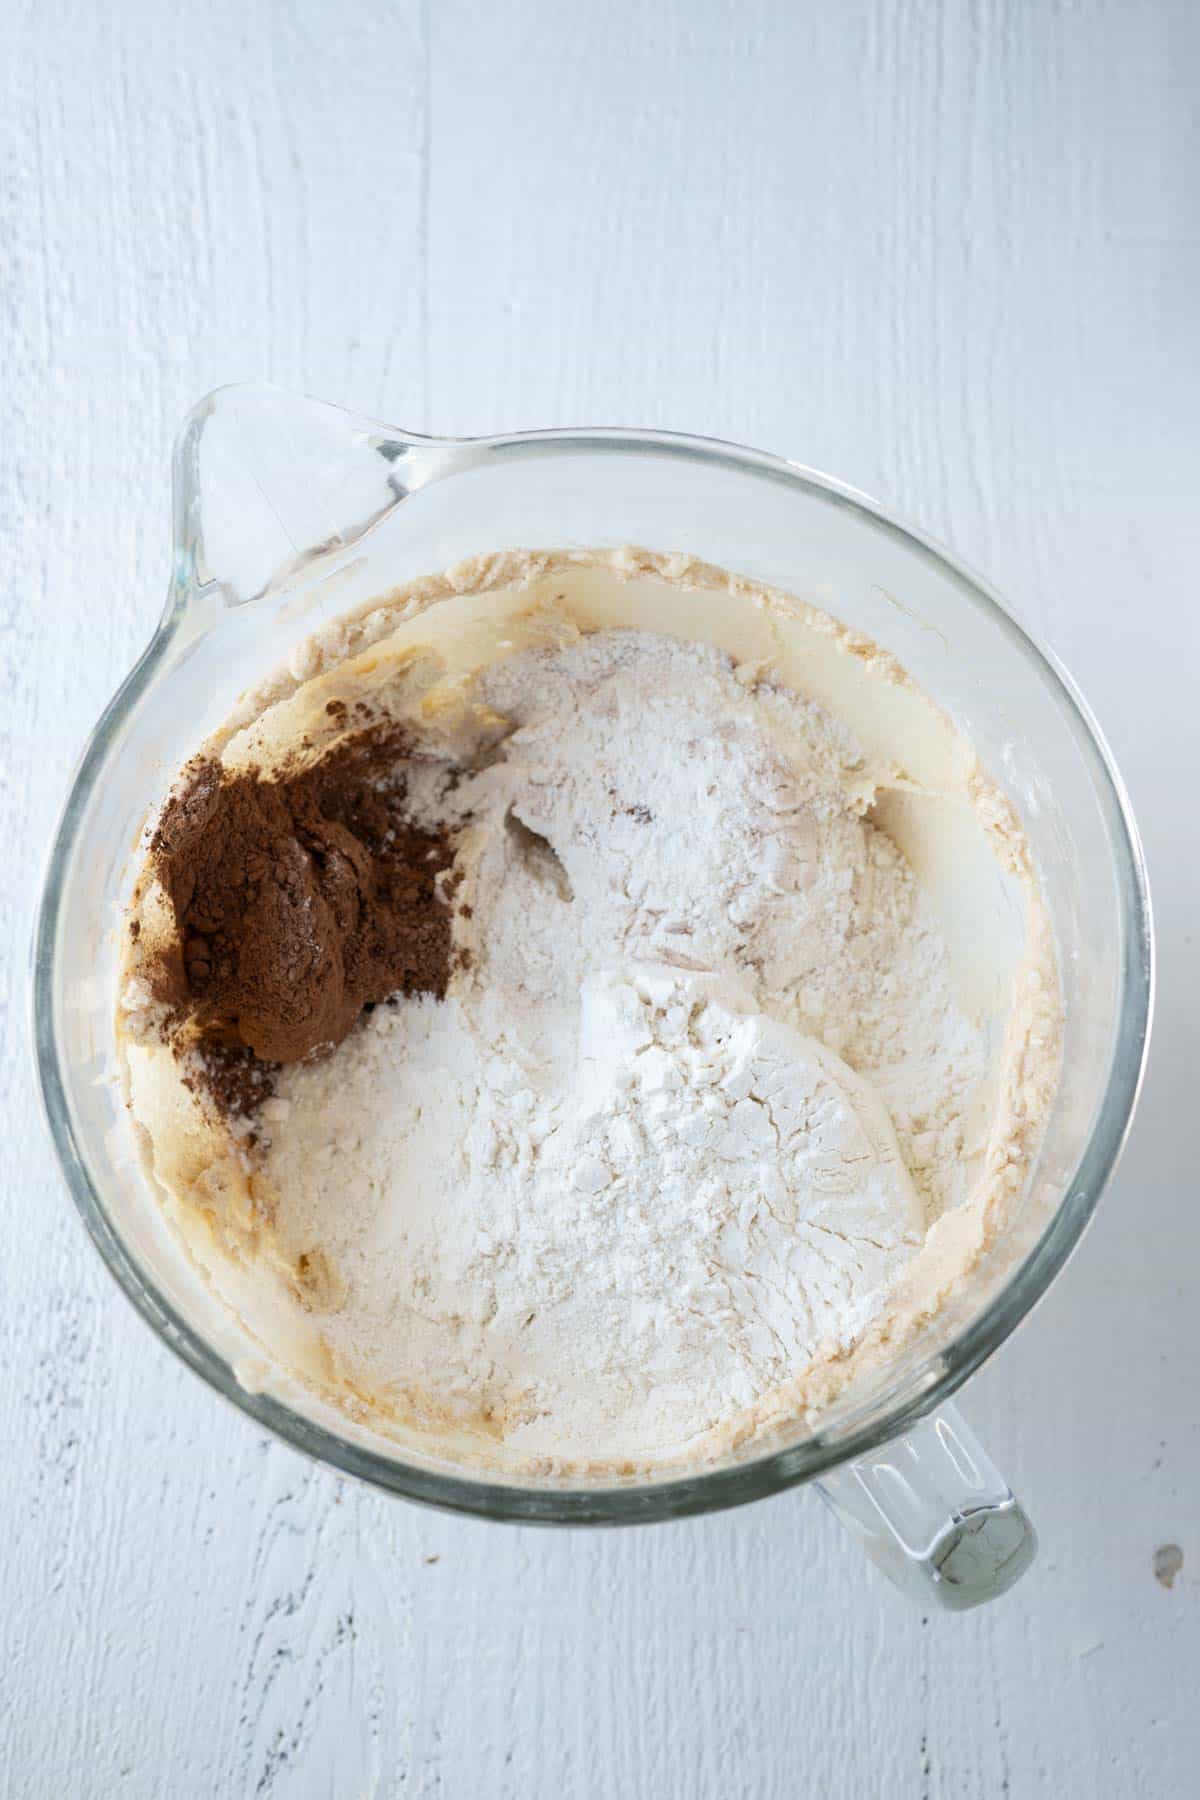 Flour, cocoa, and other dry ingedients with wet ingredients.